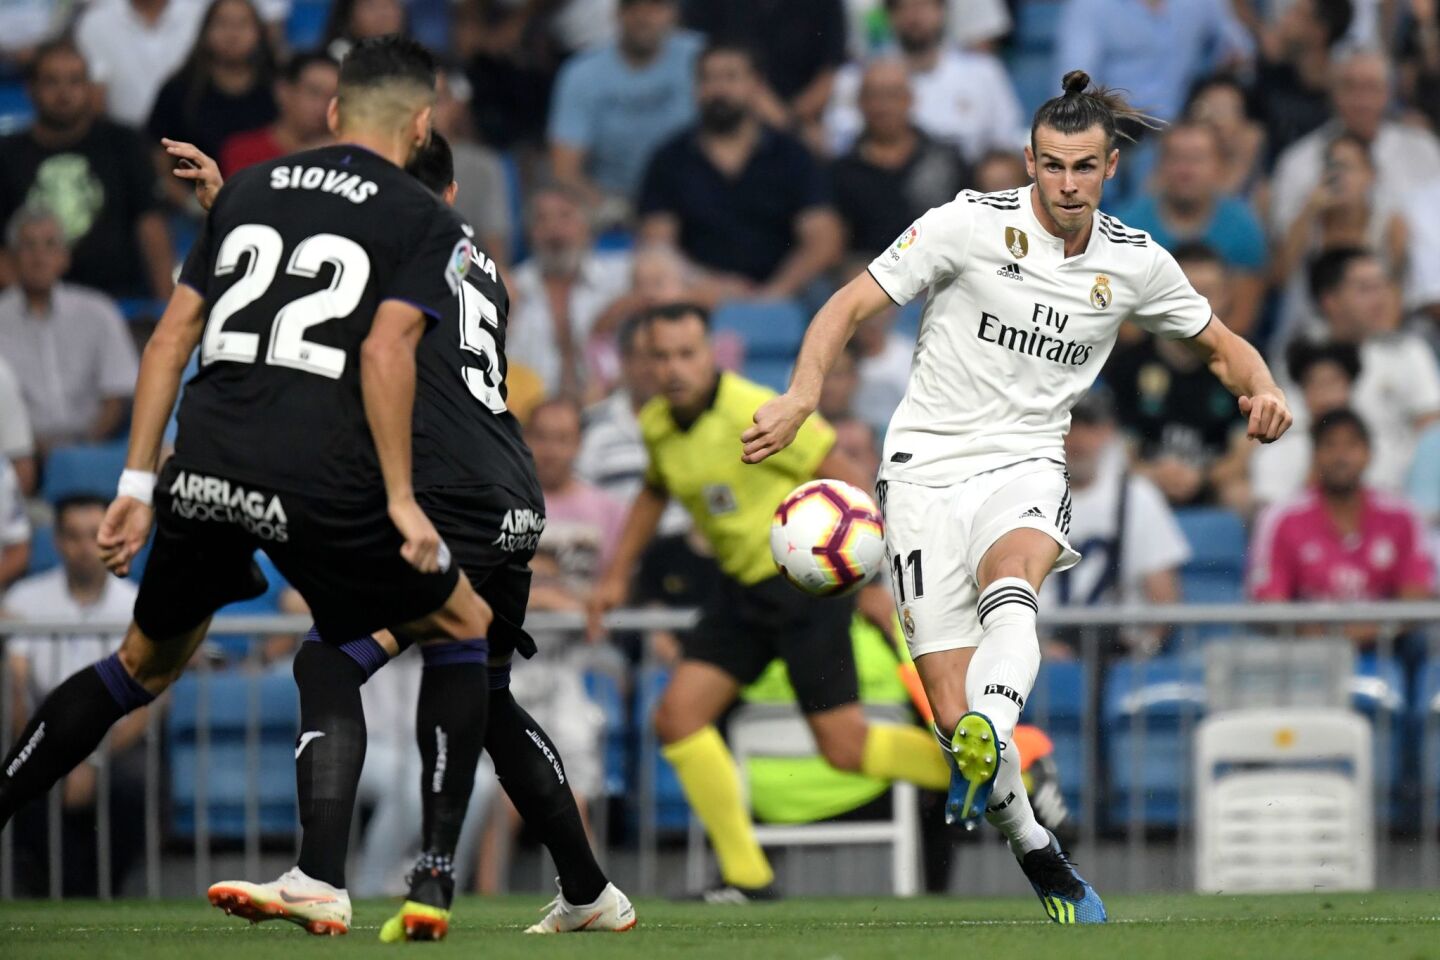 Real Madrid's Welsh forward Gareth Bale (R) challenges Leganes' Greek defender Dimitrios Siovas (L) during the Spanish league football match between Real Madrid CF and Club Deportivo Leganes SAD at the Santiago Bernabeu stadium in Madrid on September 1, 2018. (Photo by GABRIEL BOUYS / AFP)GABRIEL BOUYS/AFP/Getty Images ** OUTS - ELSENT, FPG, CM - OUTS * NM, PH, VA if sourced by CT, LA or MoD **